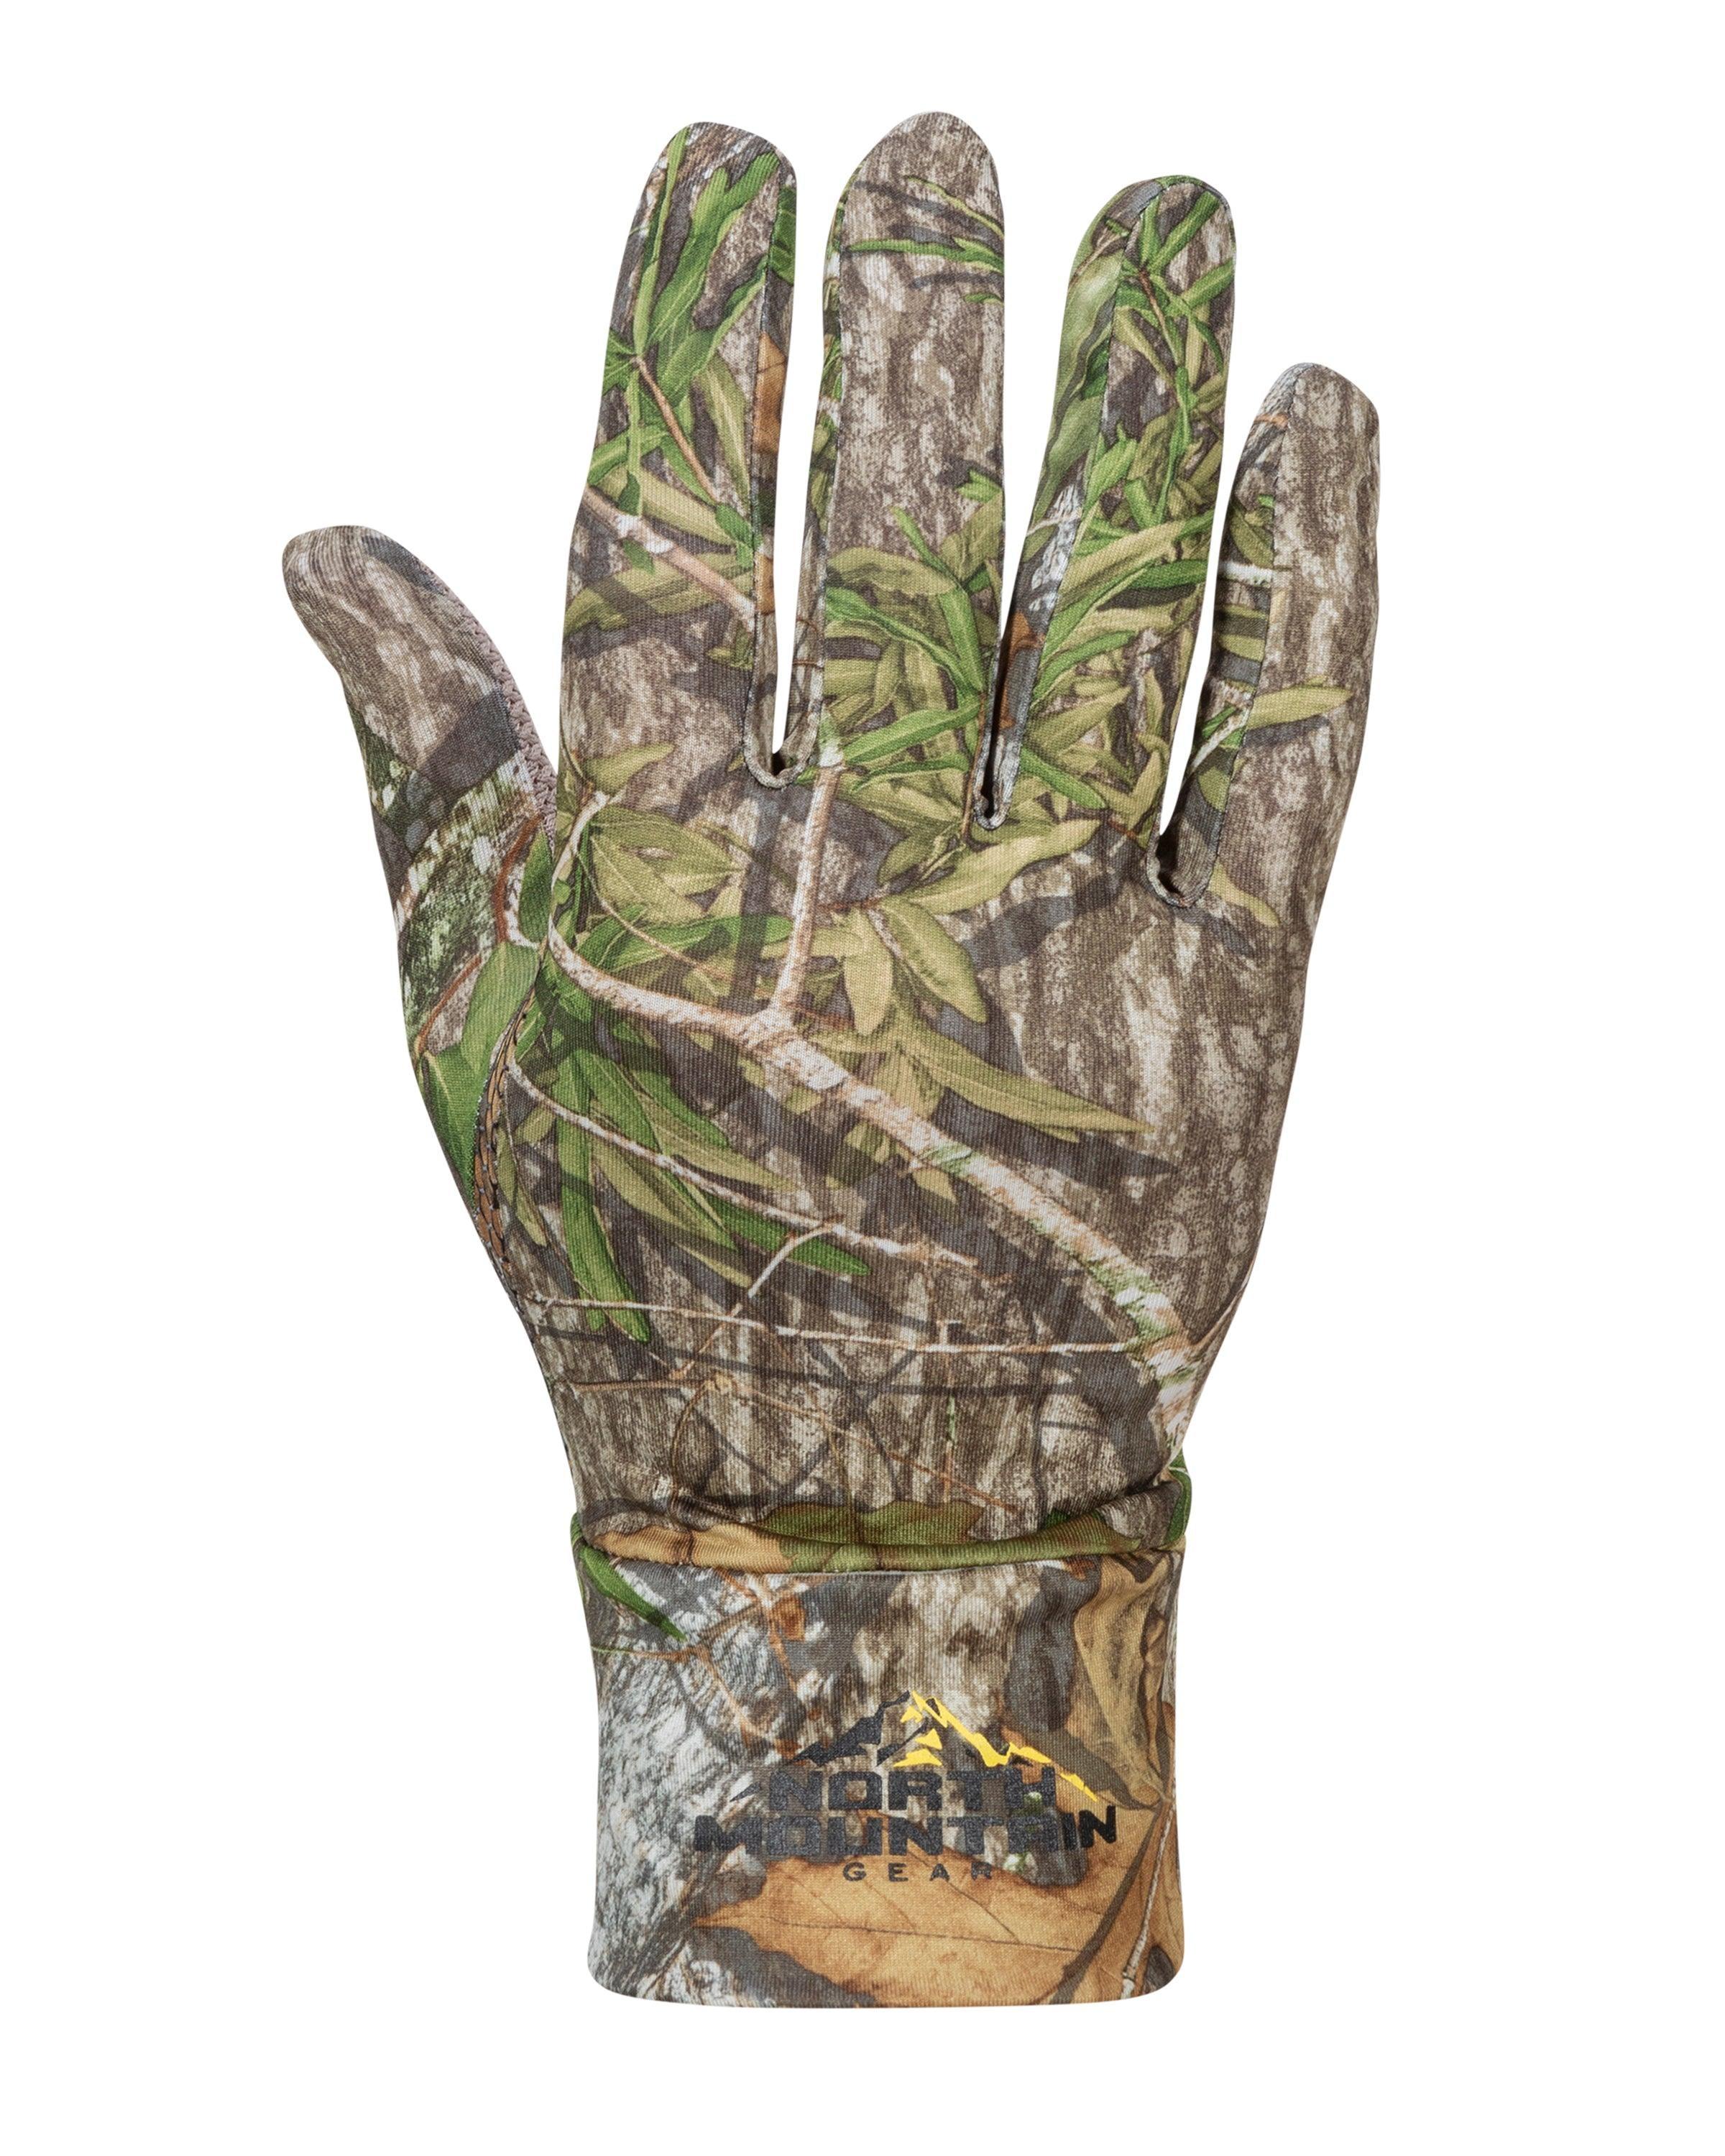 North Mountain Gear's Mossy Oak Obsession Camo Stretch Fit Gloves